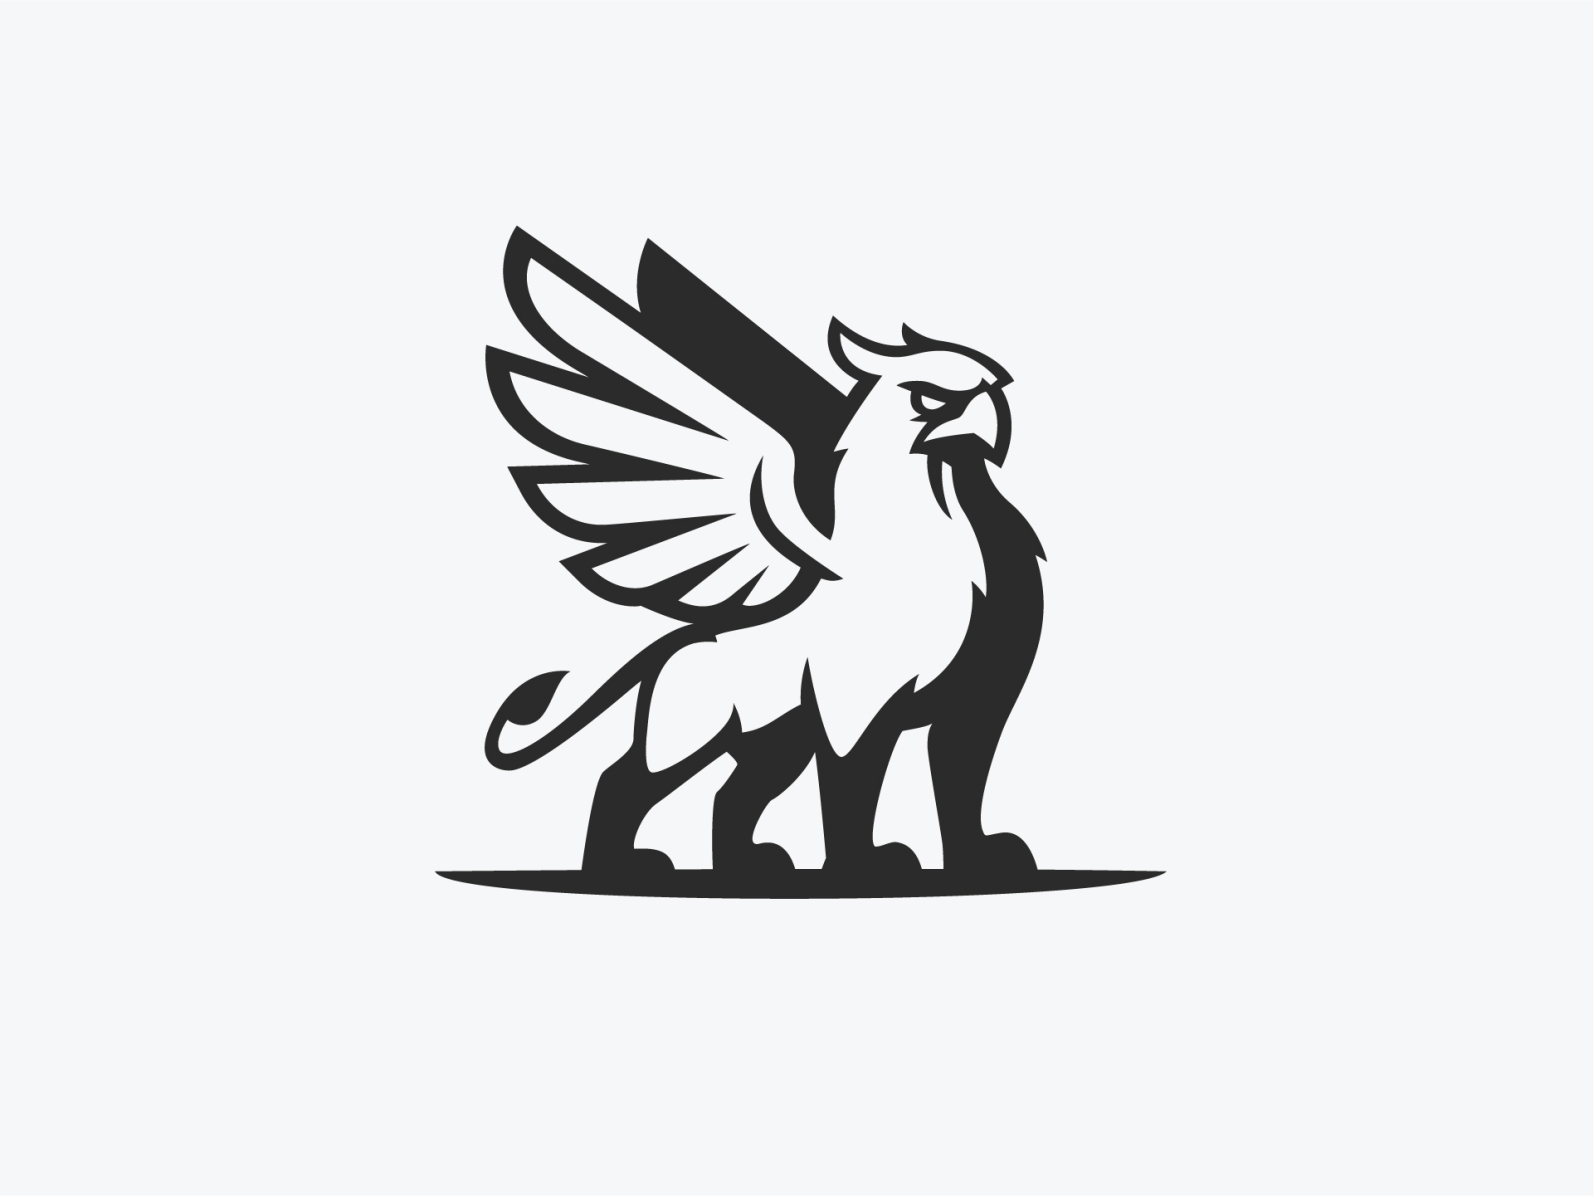 Griffin 3 by Alec Gilbertson for Foreword Co. on Dribbble